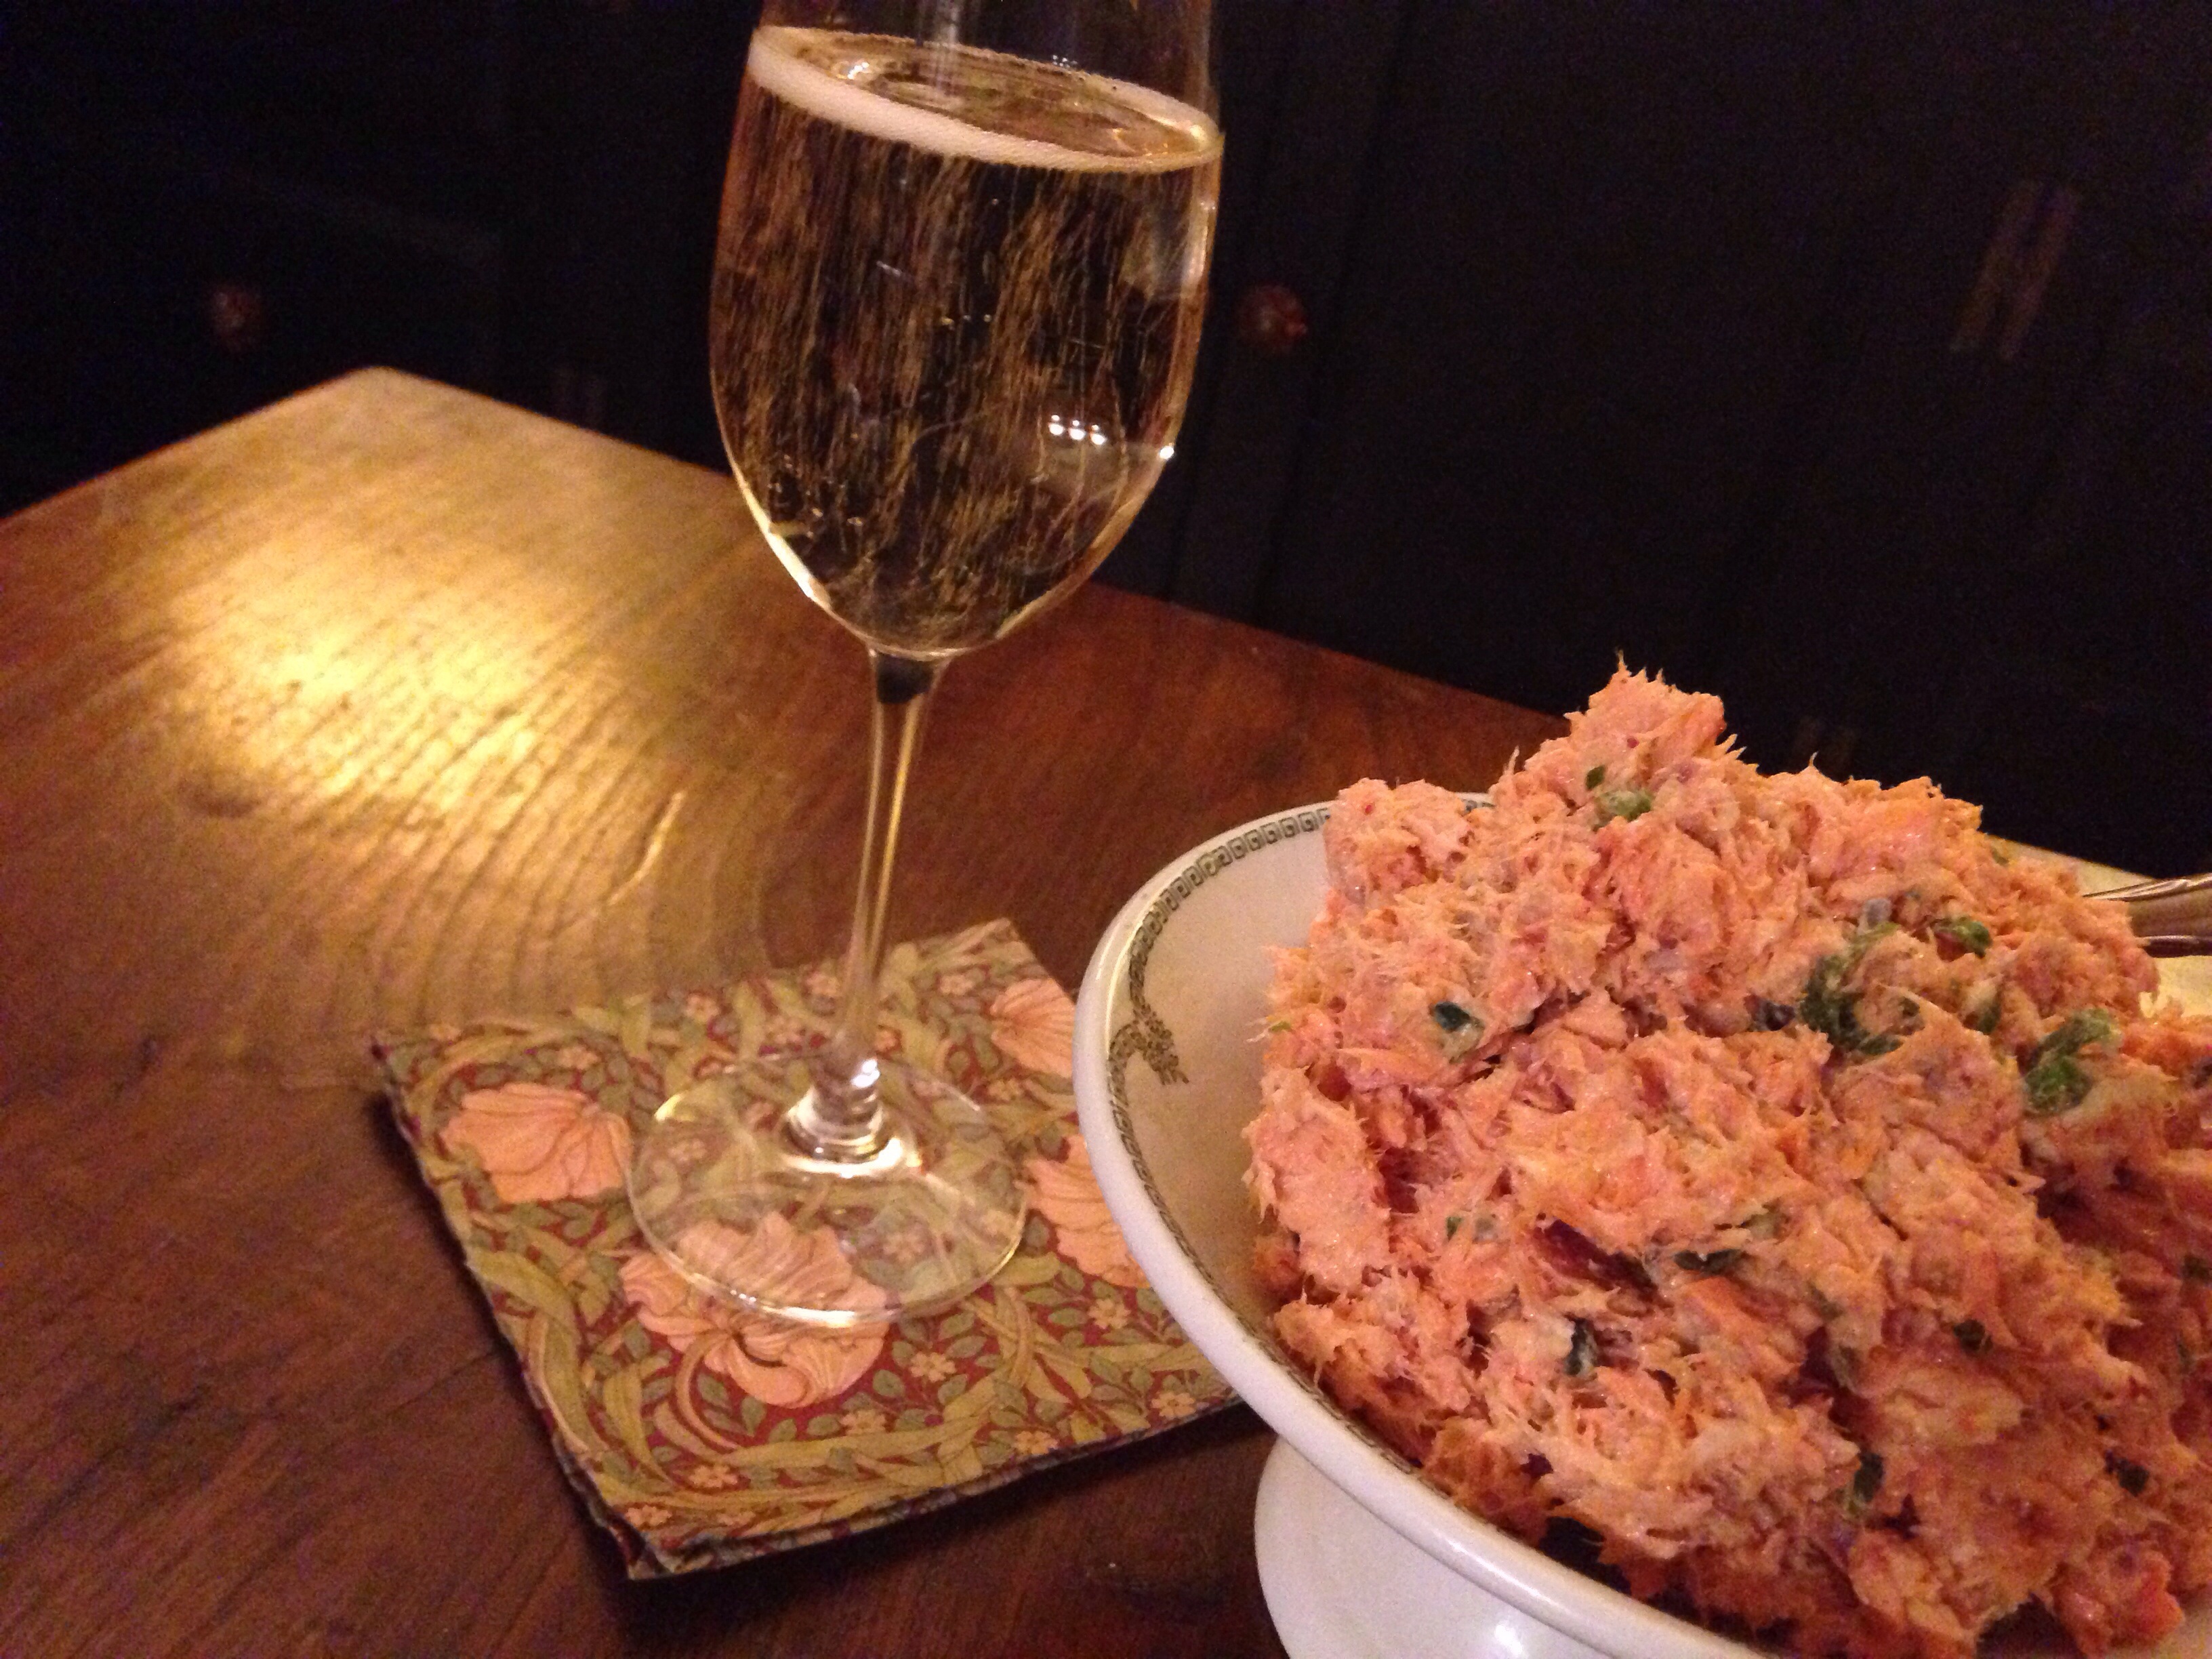 An impromptu dinner party and a new hors d’oeurves – Salmon Rillettes